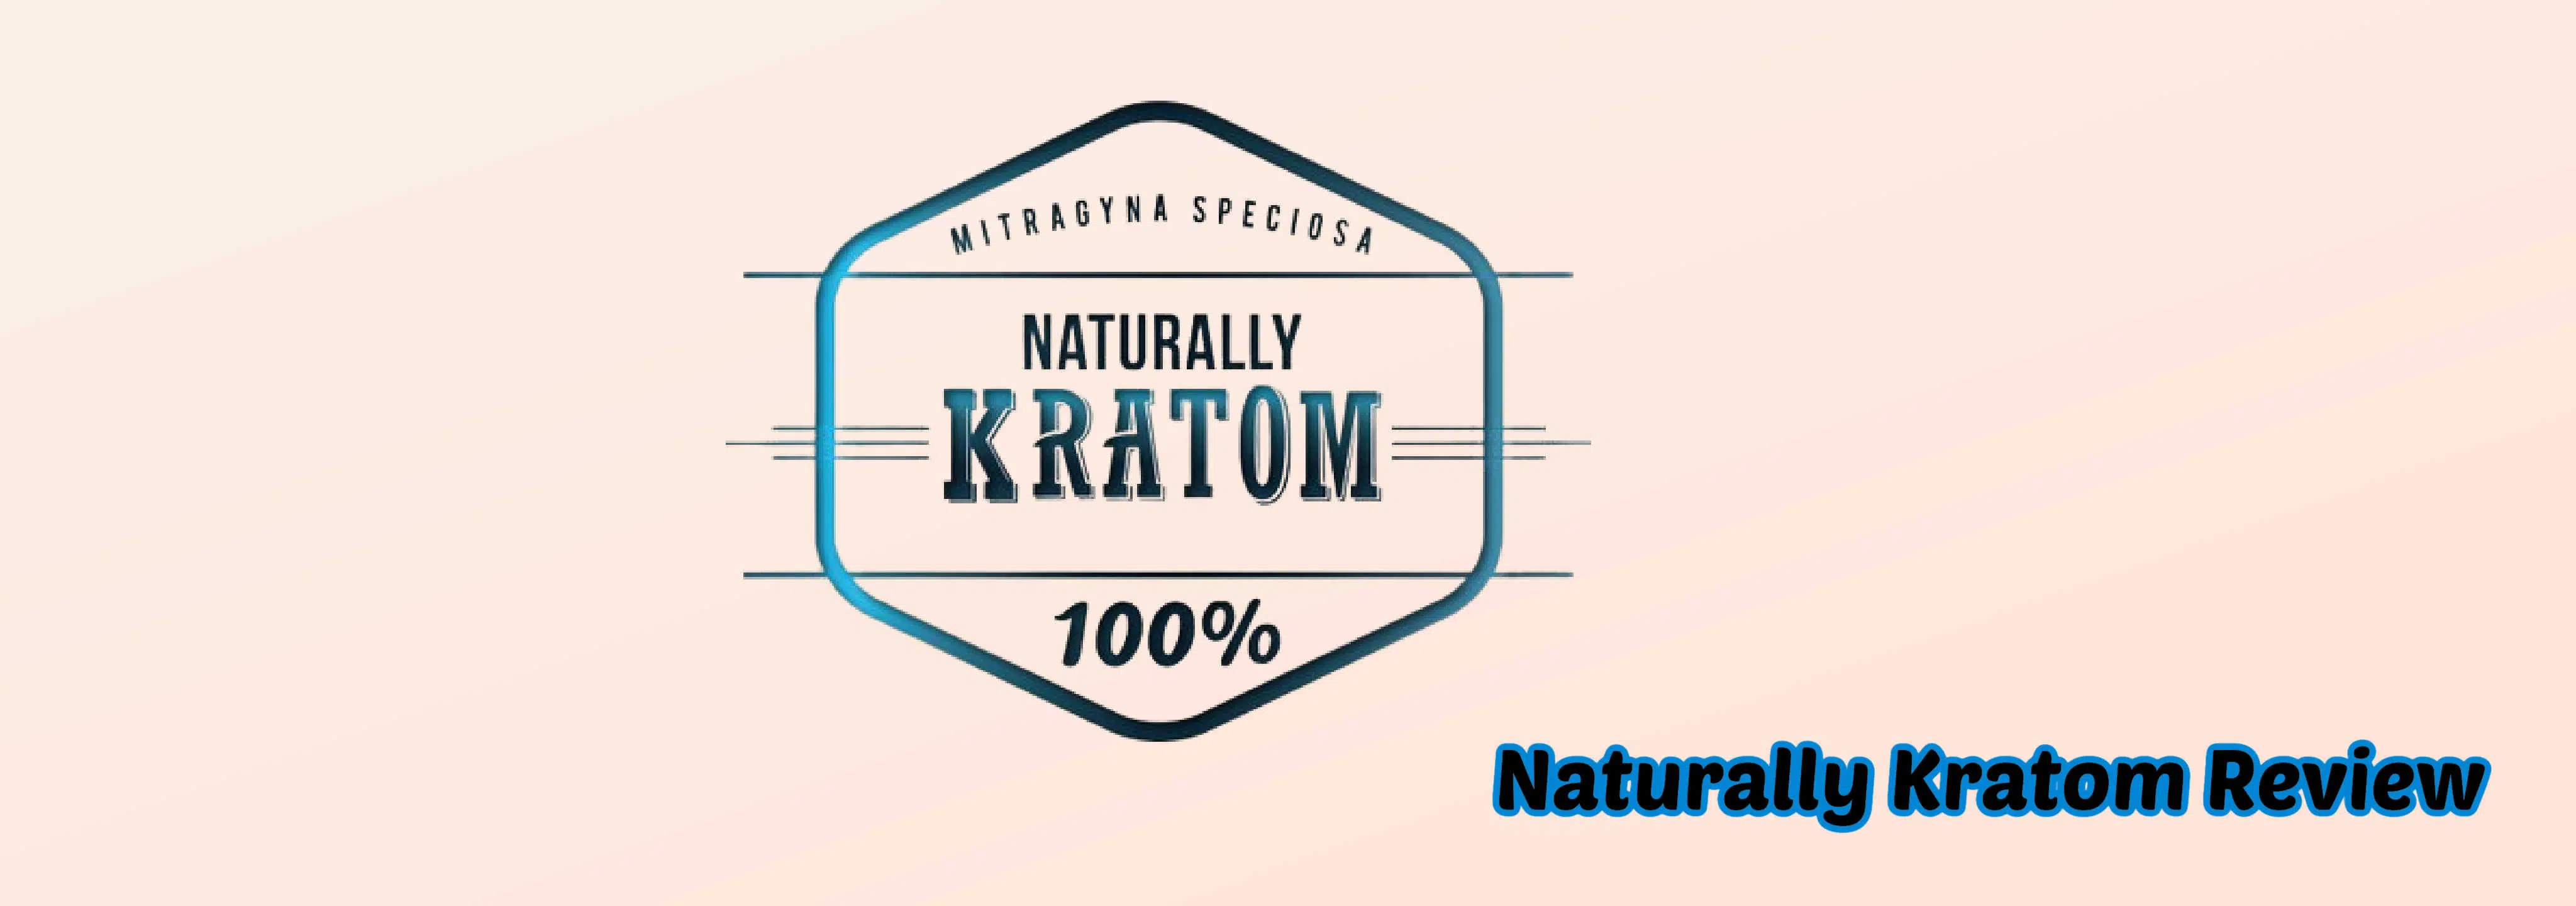 Naturally Kratom logo and review